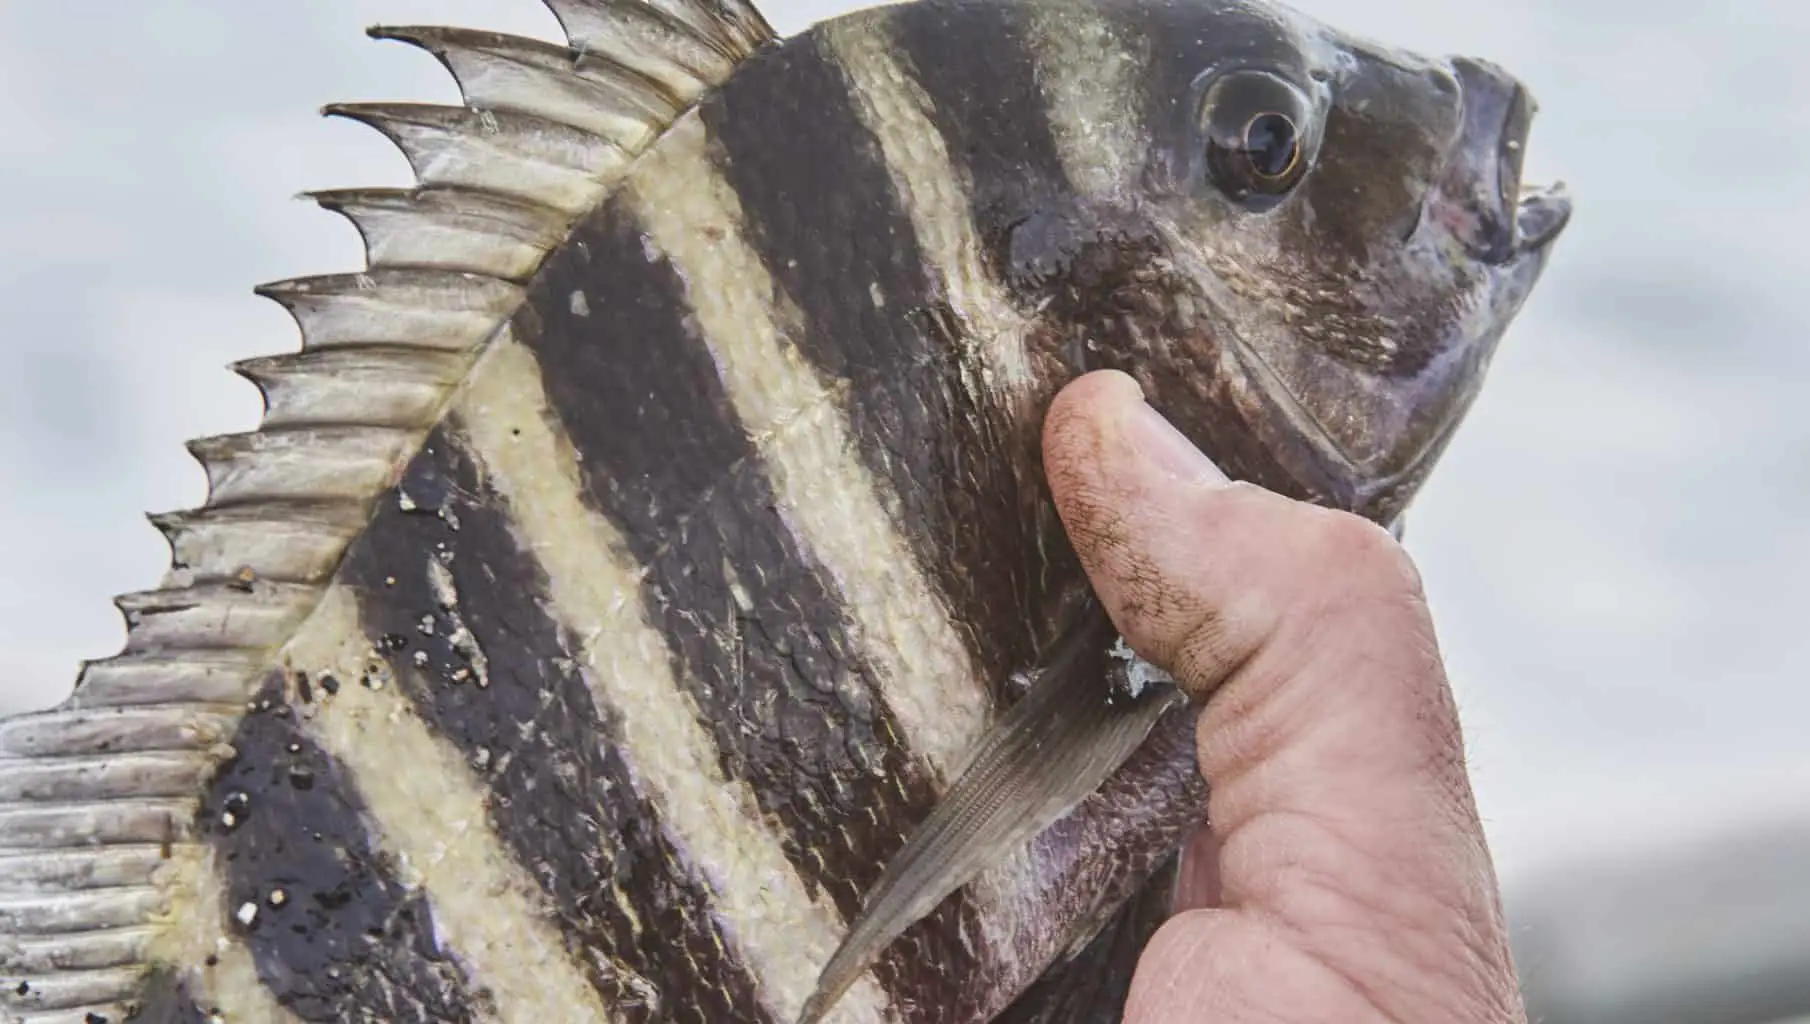 sheepshead fish just caught and being held by fisherman